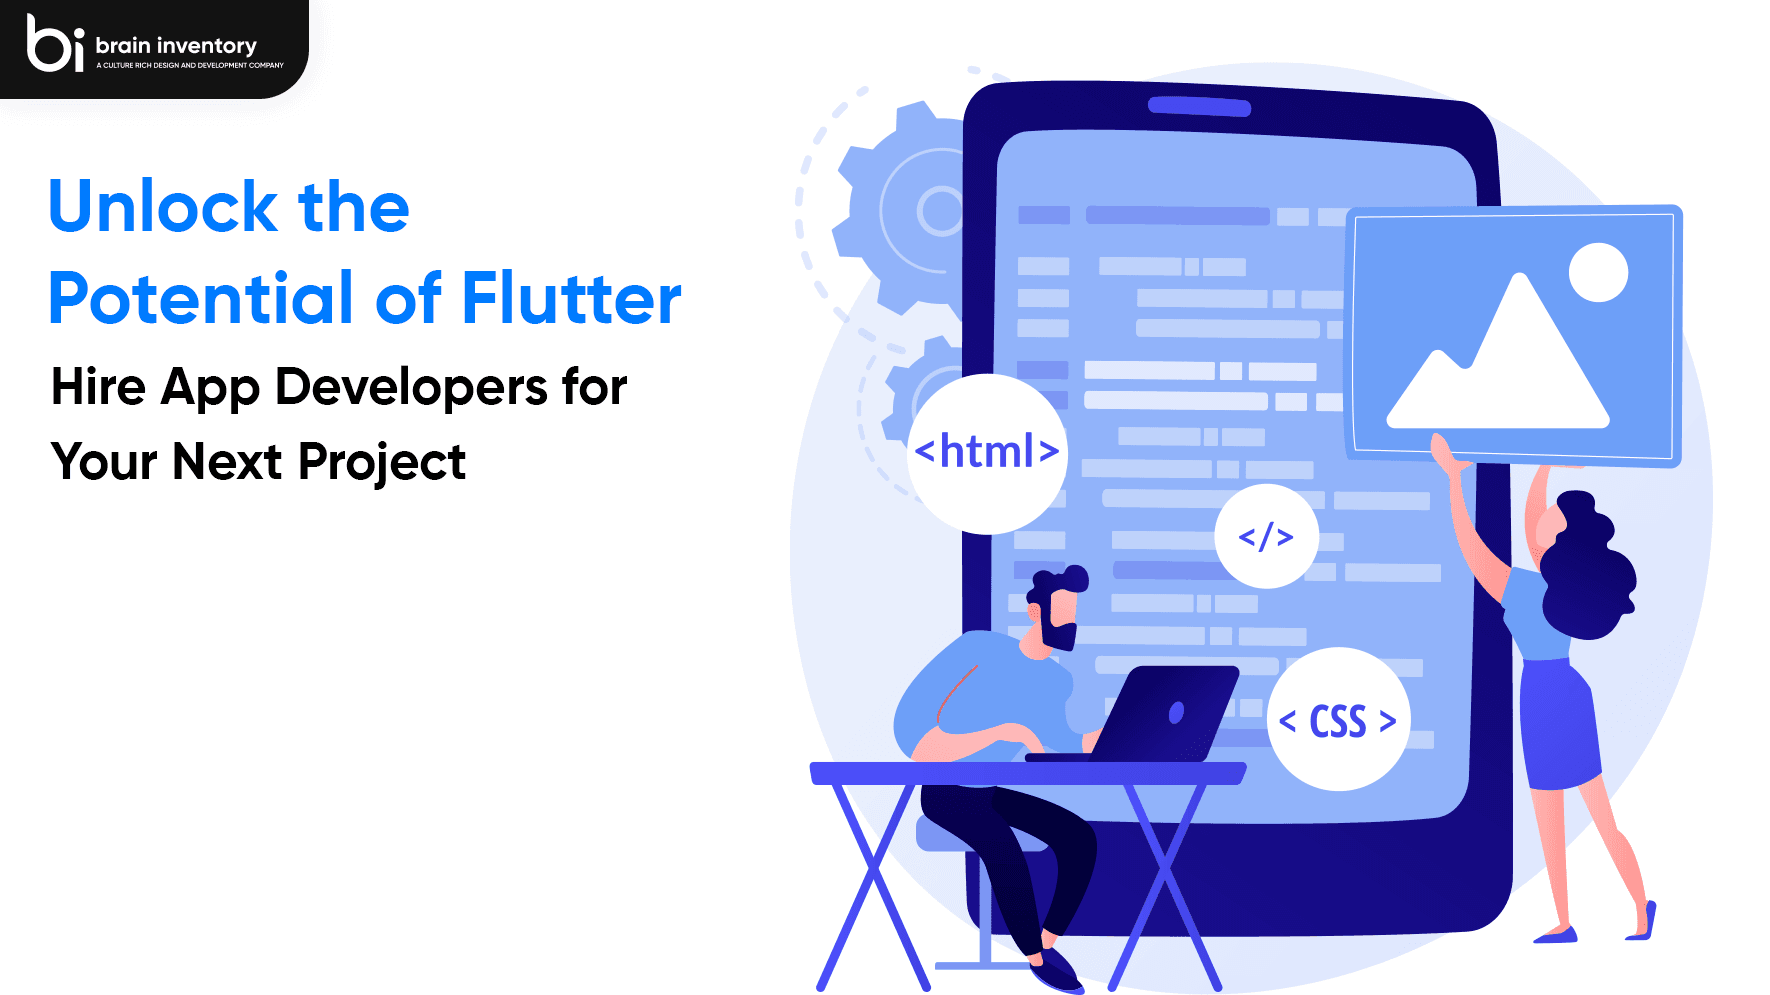 Unlock the Potential of Flutter: Hire App Developers for Your Next Project